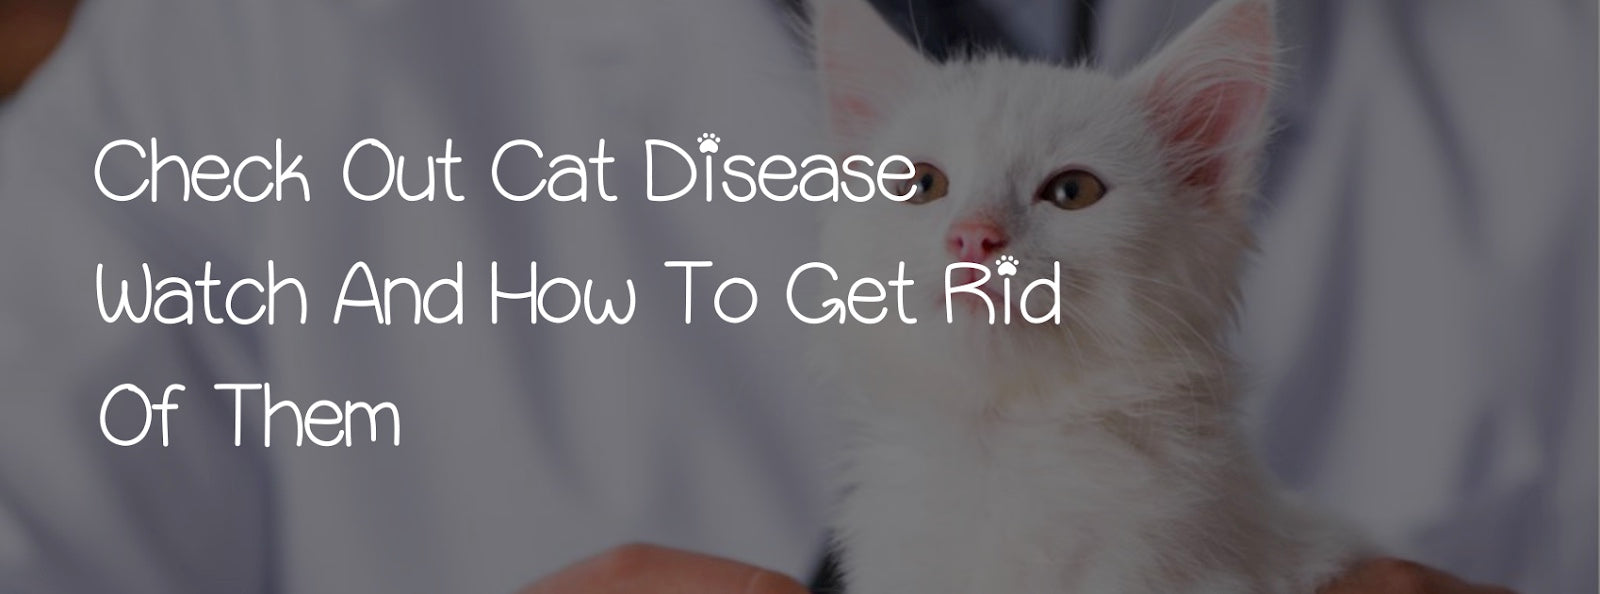 CHECK OUT CAT DISEASE WATCH AND HOW TO GET RID OF THEM